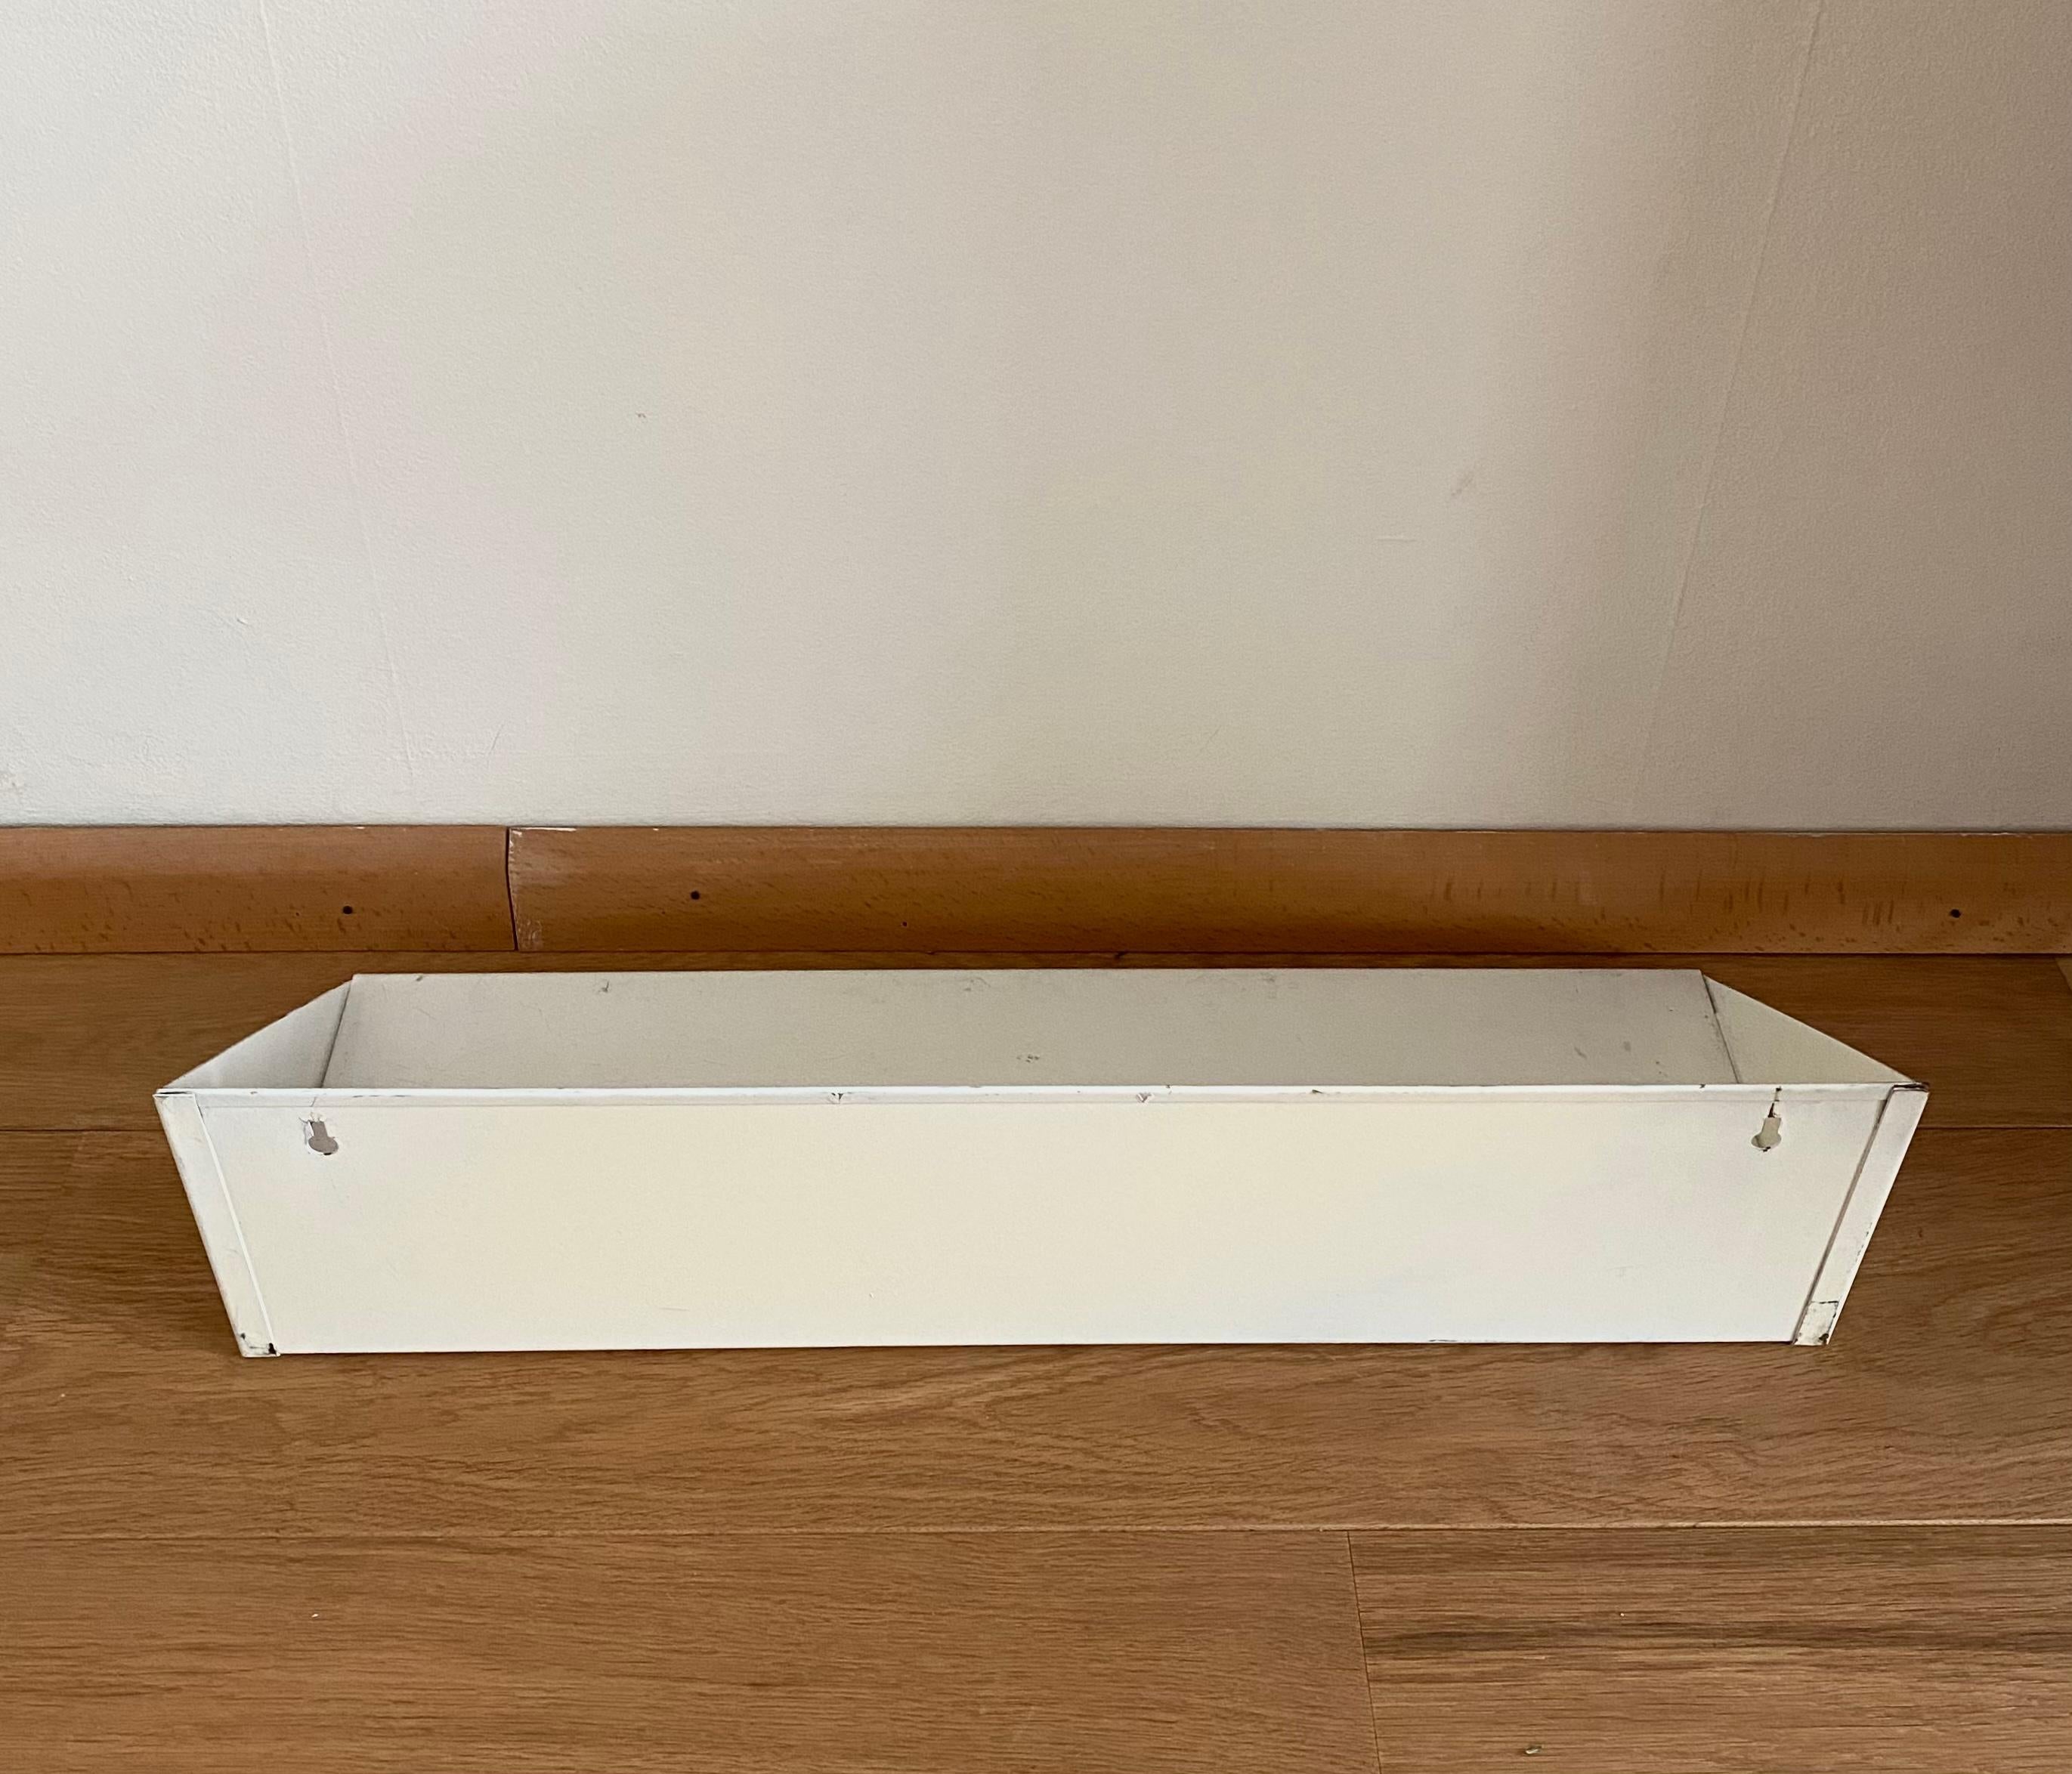 Lacquered Rare Wall Shelf by Constant Nieuwenhuys for Asmeta, Netherlands, 1950s For Sale